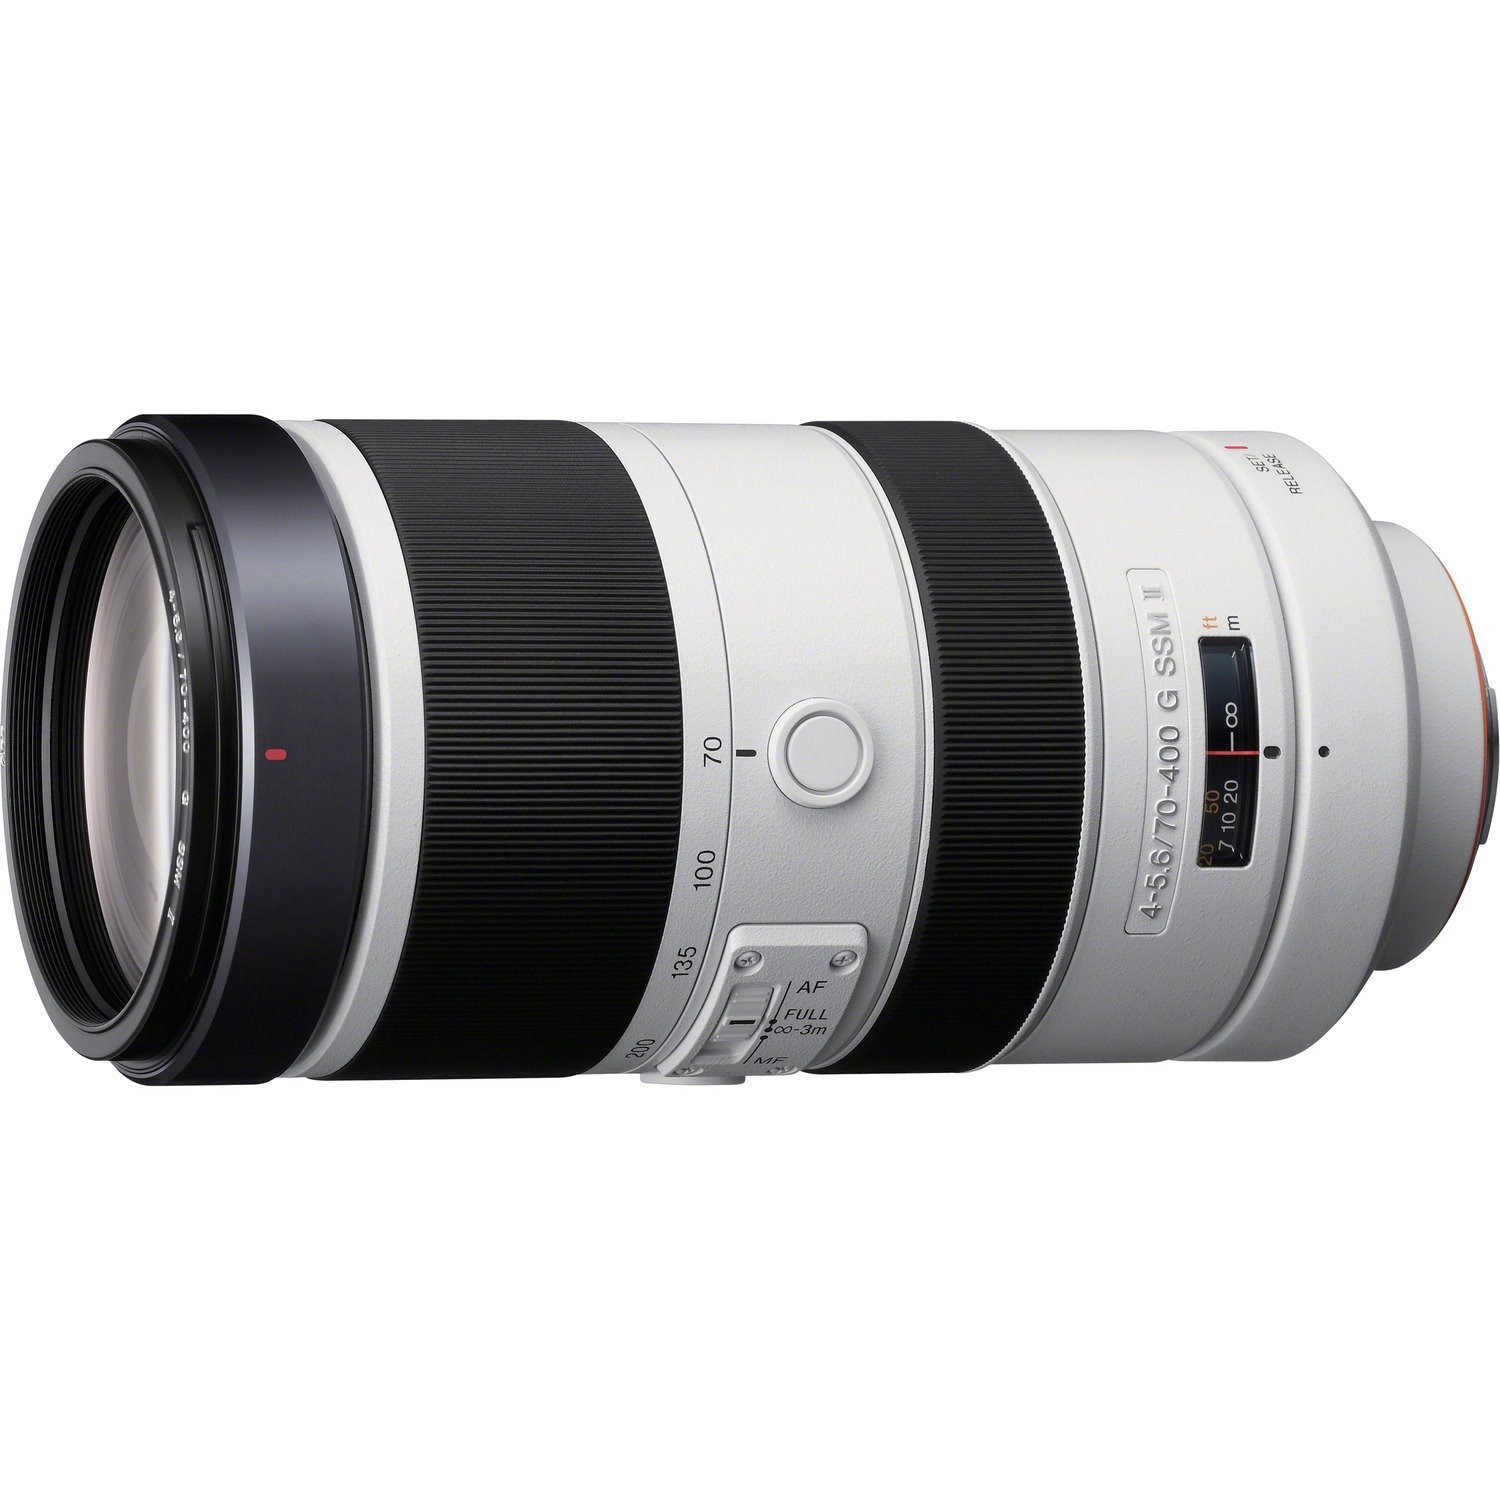 Sony - 70 mm to 400 mm - f/5.6 - Super Telephoto Zoom Lens for Sony Alpha